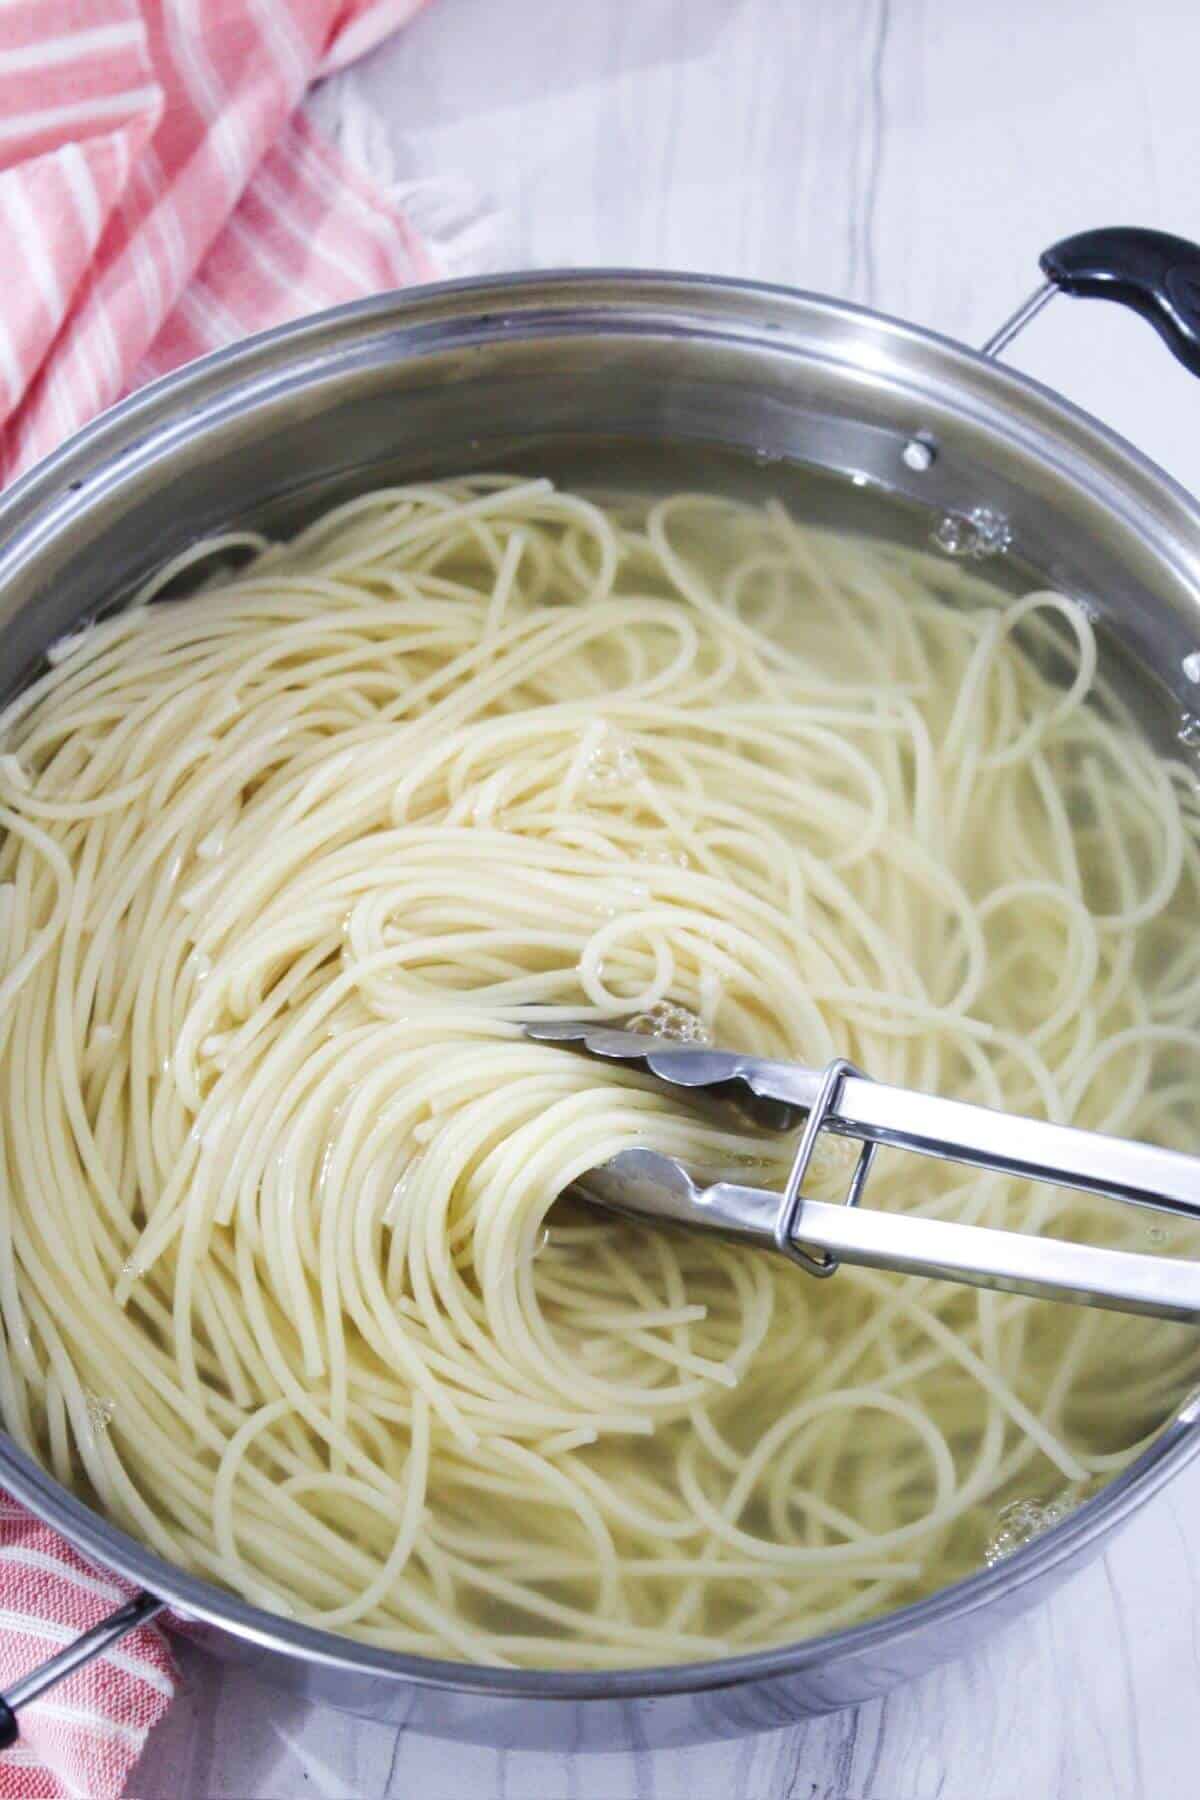 Spaghetti in a pan with two tongs.